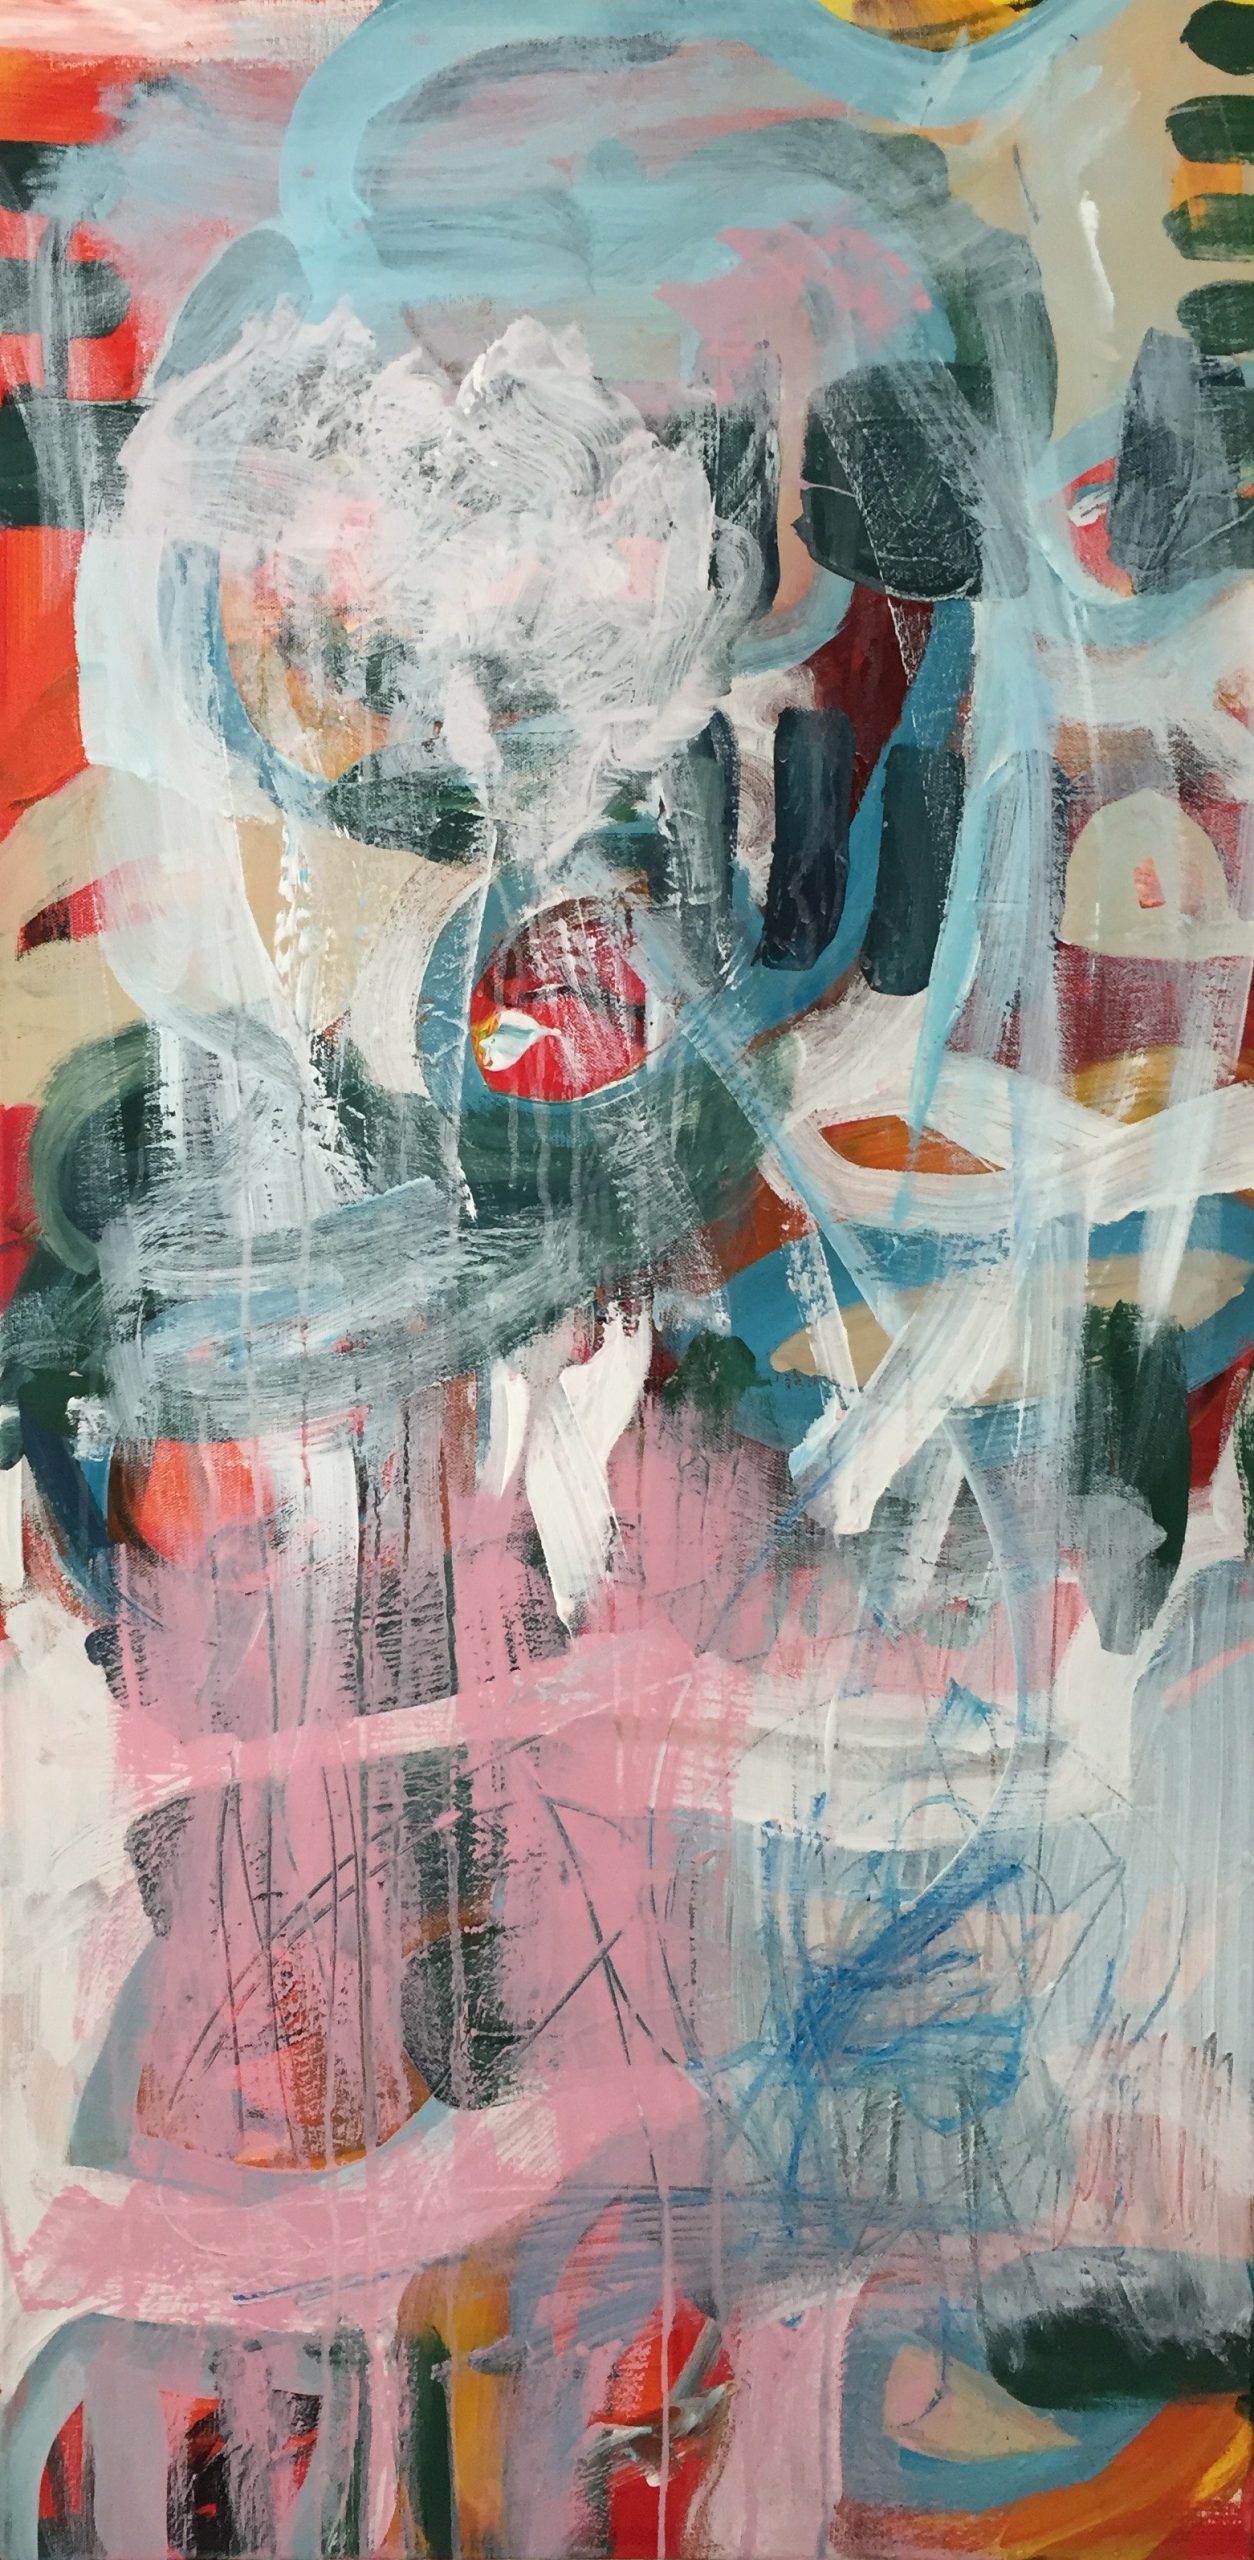 African Home, 2019, 50 x 100 cm